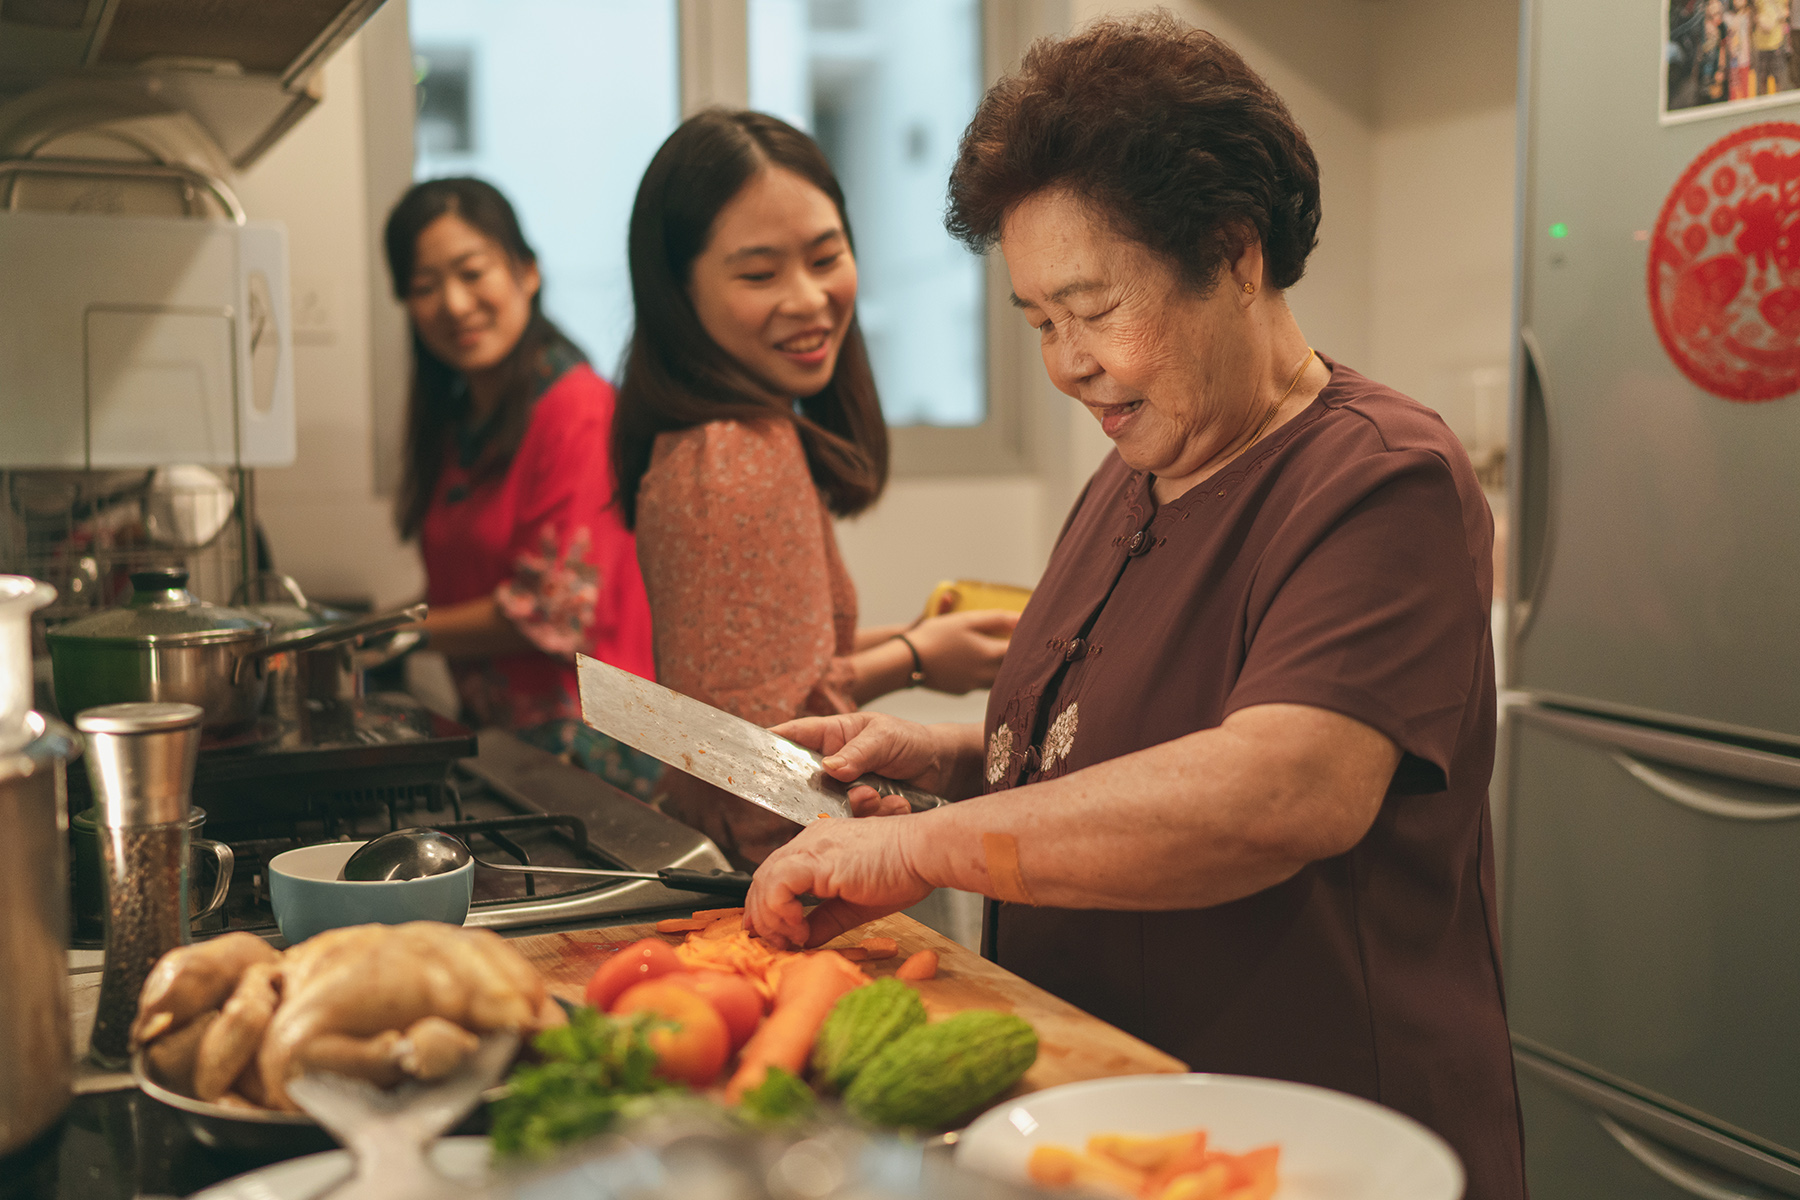 A grandmother cooking with her granddaughter and daughter in the kitchen